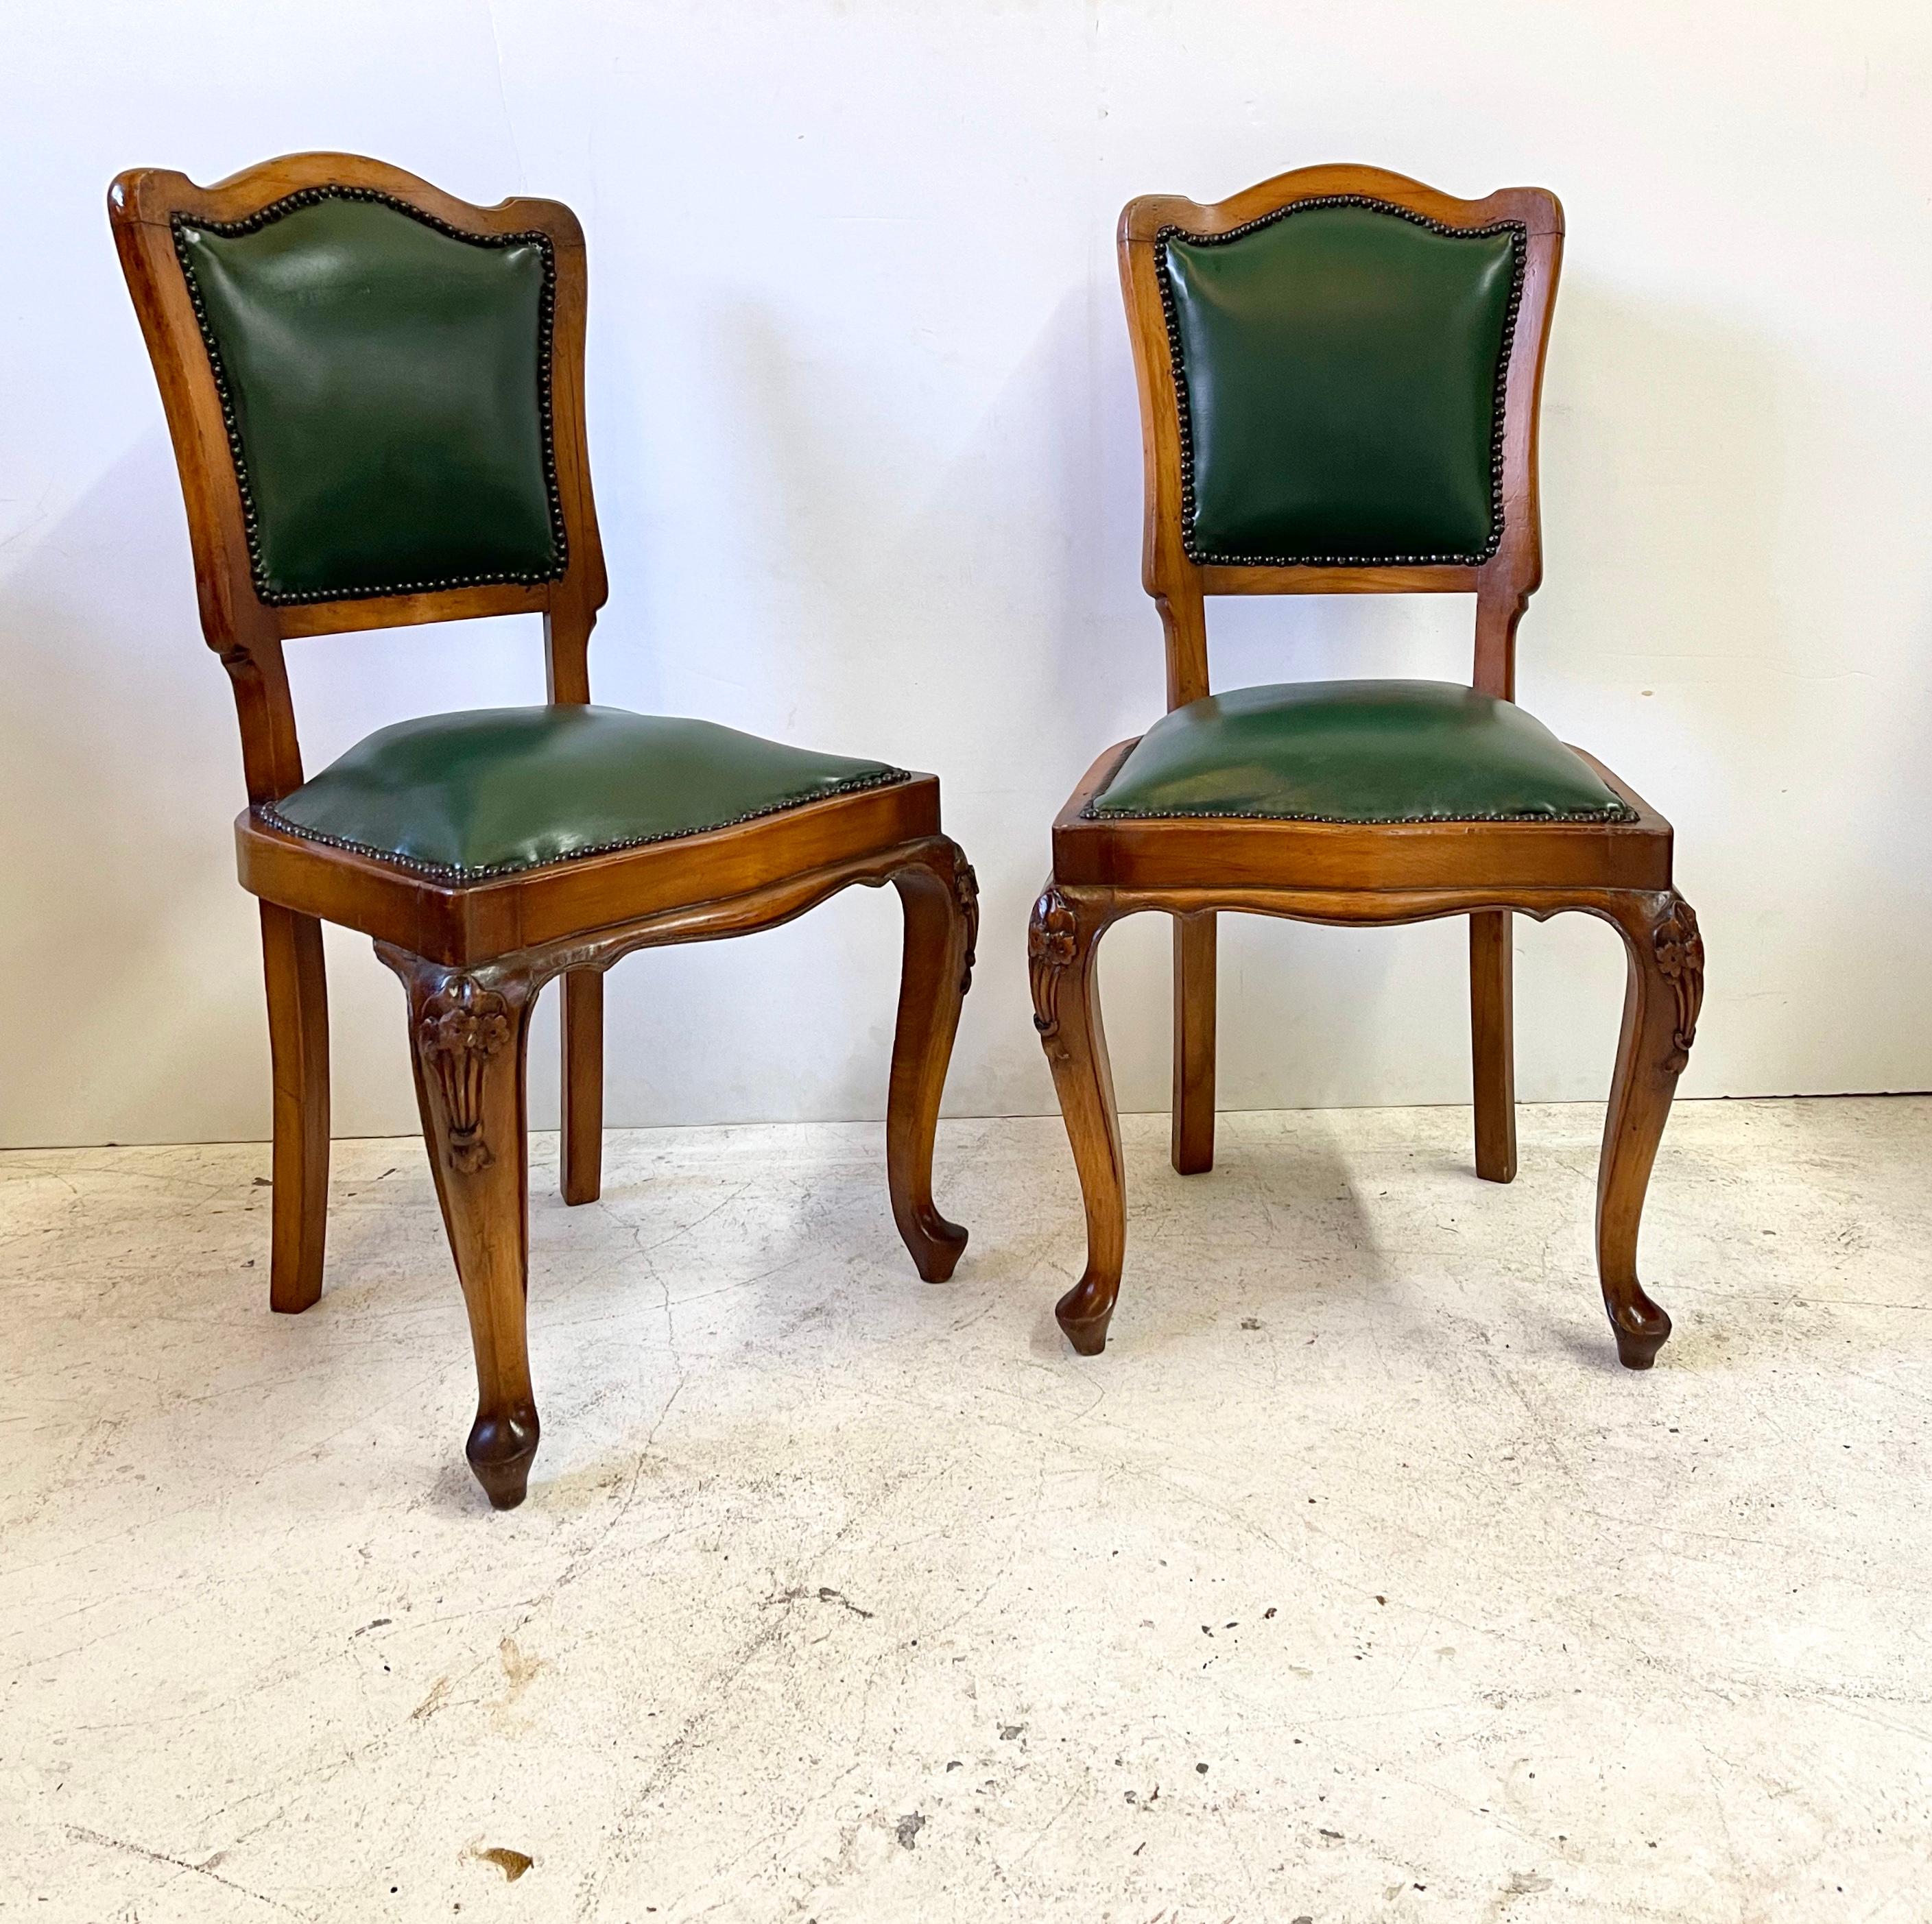 Pair of 19th century Italian side chairs in the style of Louis XV with fruitwood frames, solid wood backs, and beautifully carved cabriole legs. The chair seats and the backs are upholstered and lined with nailheads.